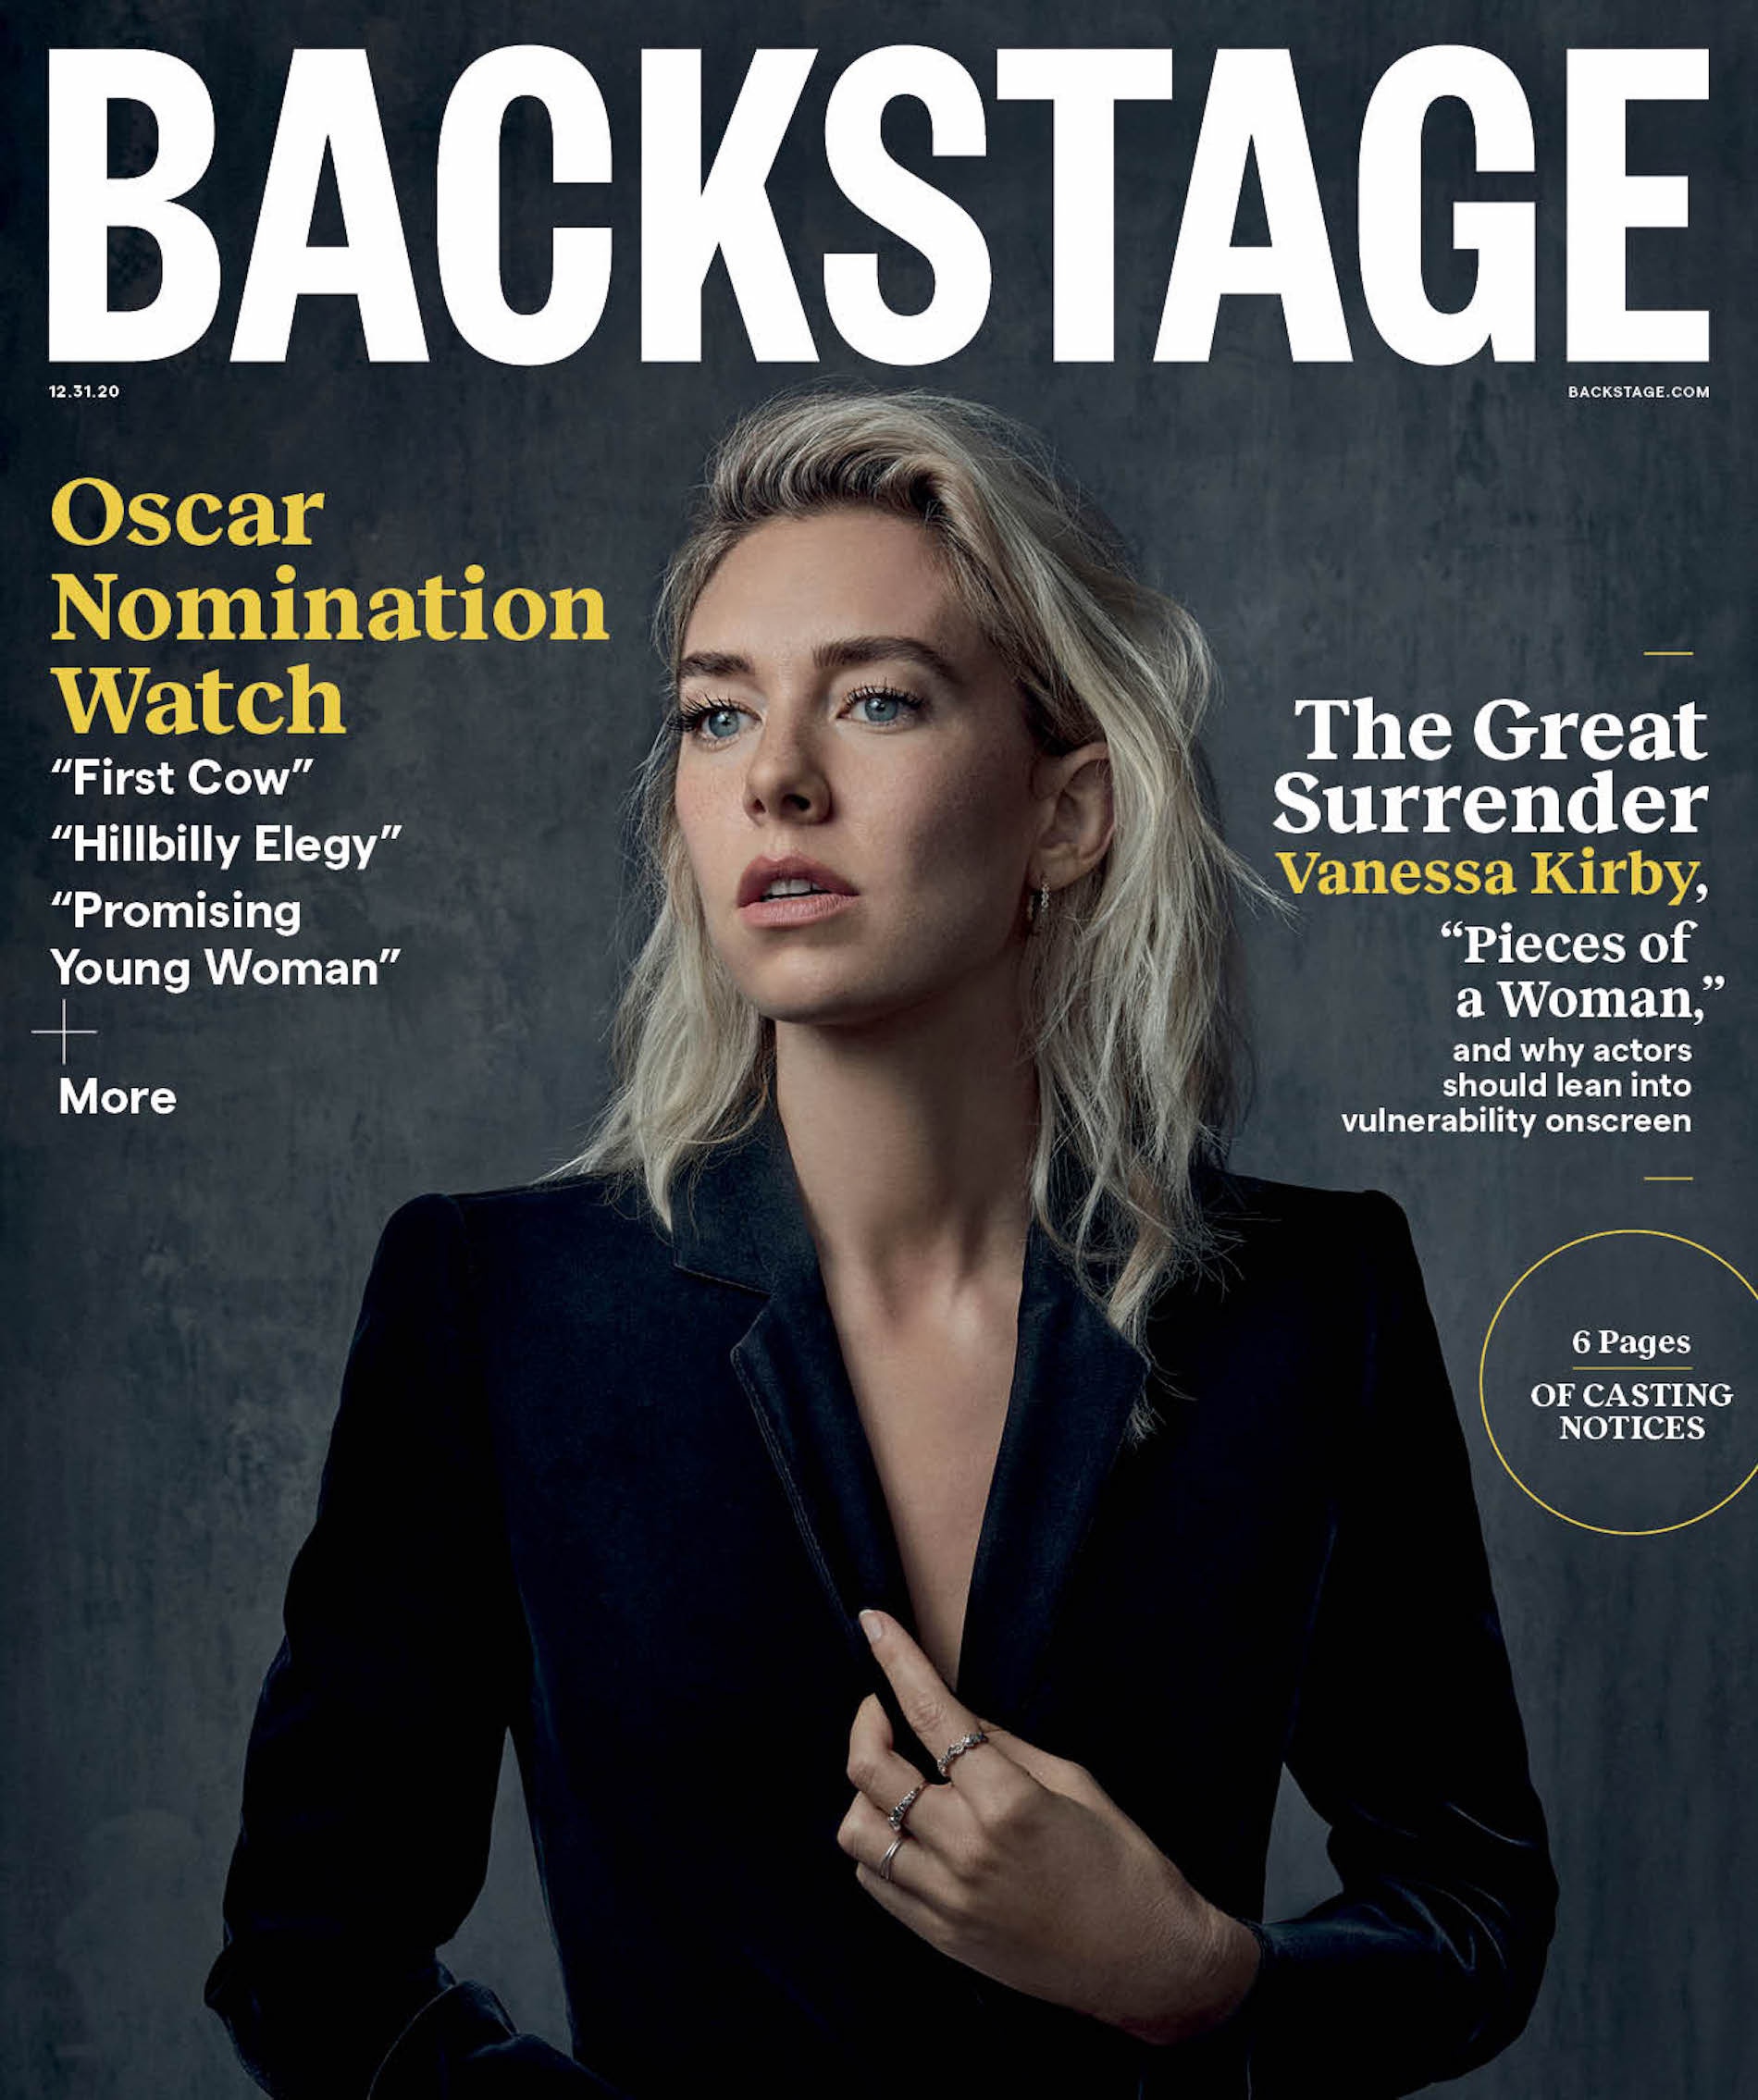 Vanessa Kirby On Pieces Of A Woman And Facing Fears Backstage